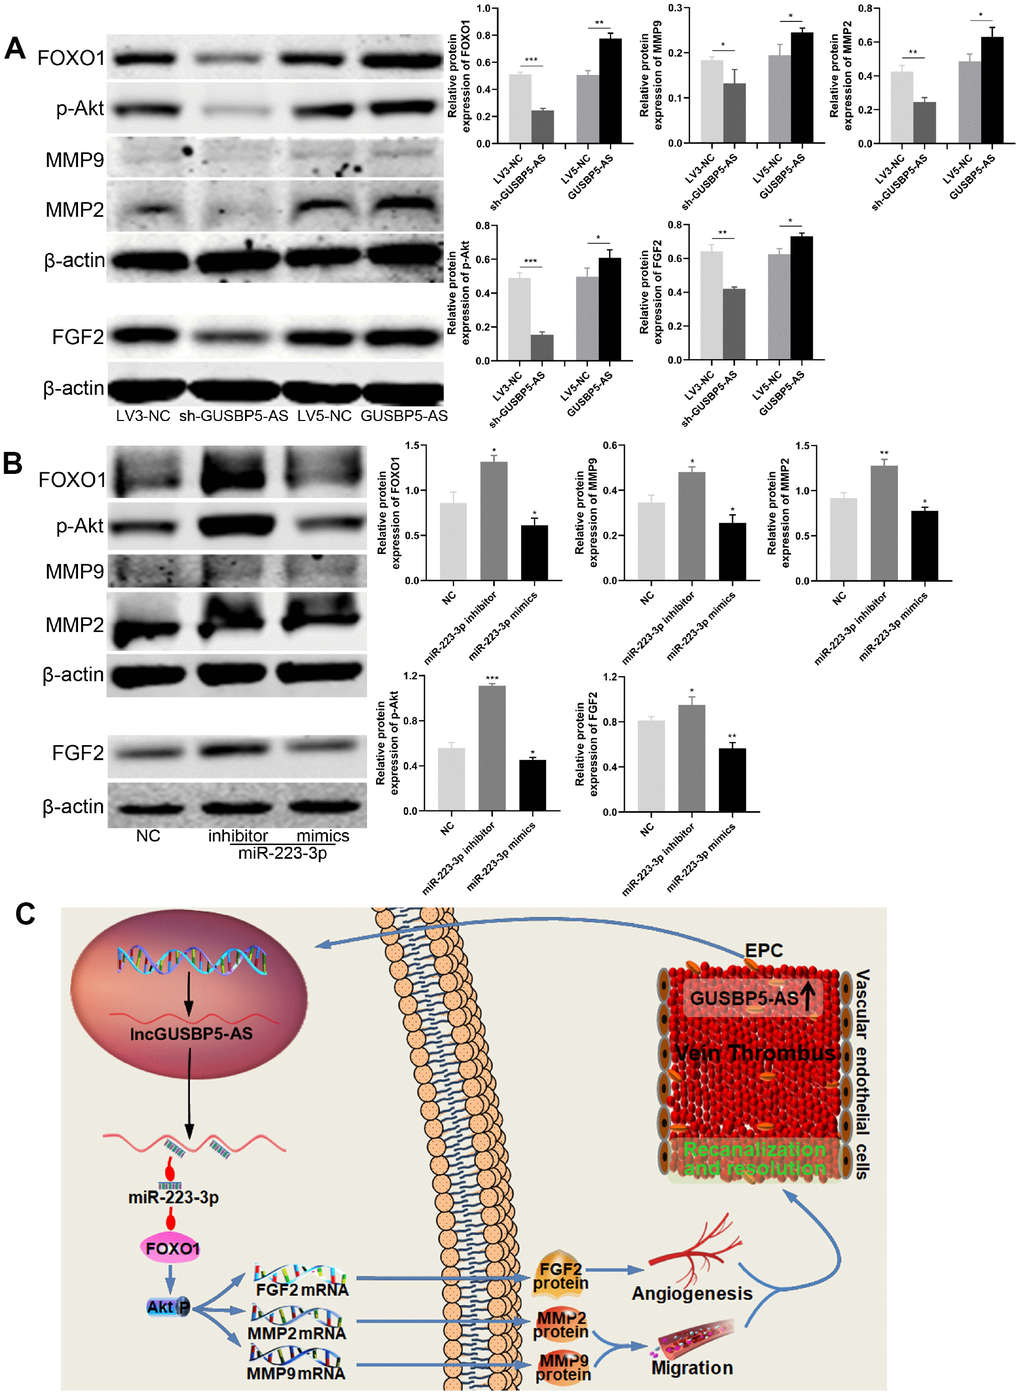 GUSBP5-AS regulates FGF2 and MMP2/9 expression through FOXO1/Akt pathway by sponging with miR-223-3p. (A) Effects of GUSBP5-AS on the regulation of the protein expression of FOXO1, p-Akt, MMP2, MMP9 and FGF2 in EPCs by western blot analysis. GUSBP5-AS knockdown and overexpression, respectively, reduced and increased these protein expression levels. (B) Western blot analysis of the protein expression levels of FOXO1, p-Akt, MMP2, MMP9 and FGF2 in EPCs after infected with NC, miR-223-3p inhibitor and mimics. The resulted showed that miR-223-3p inhibitor and mimics, respectively, promoted and inhibited these protein expression. *P C) Schematic of the role of GUSBP5-AS-mediated effects in EPCs. Red arrow indicates inhibition and blue arrow indicates promotion.